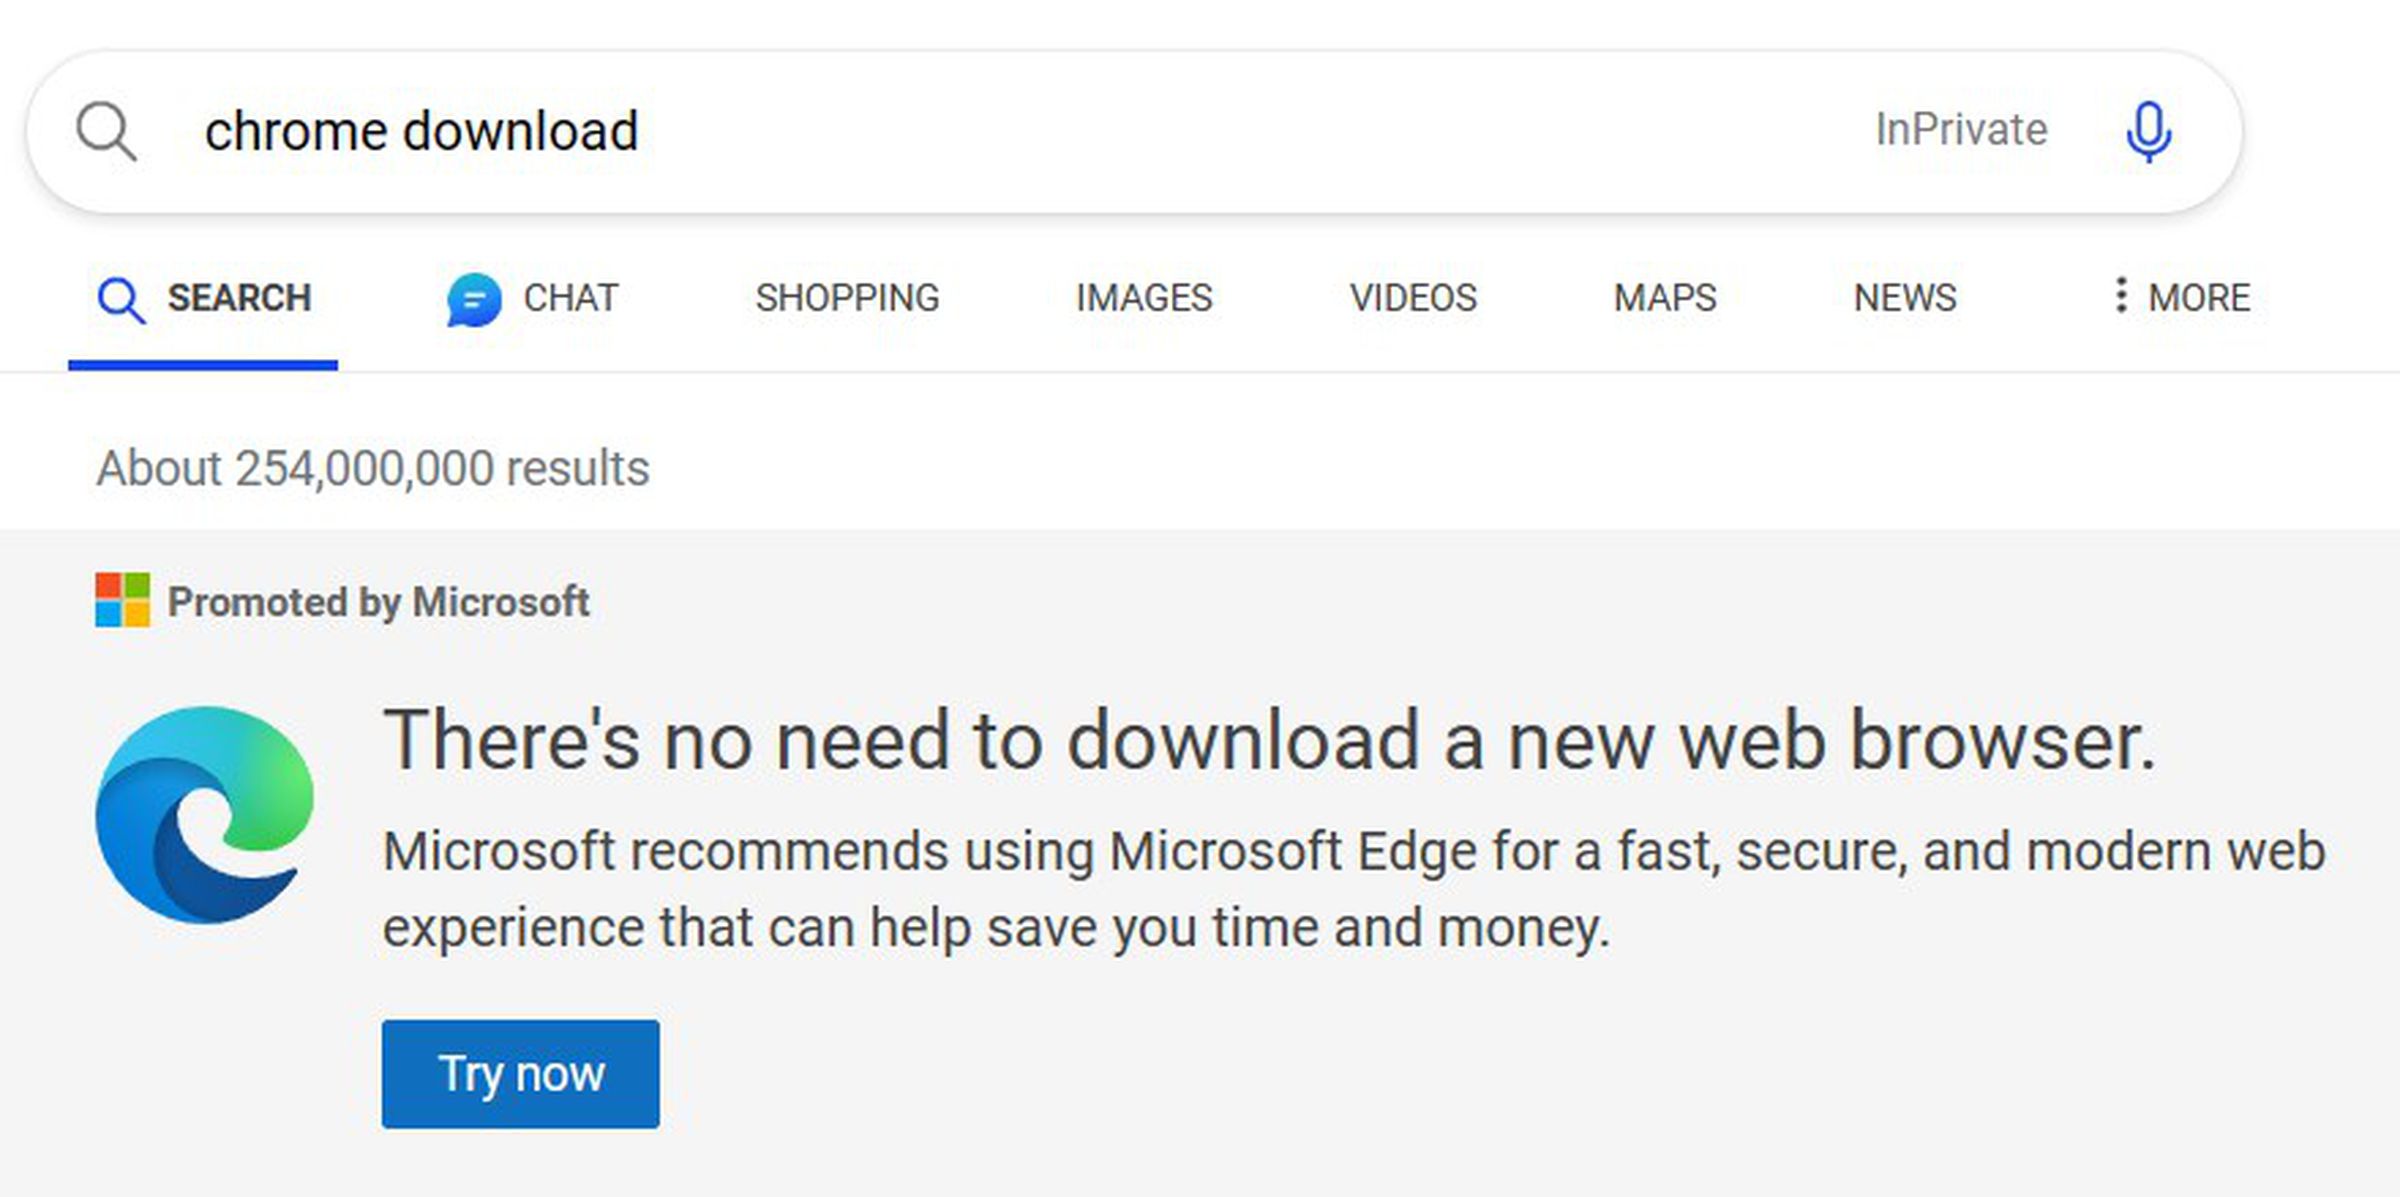 “There’s no need to download a new web browser,” reads the top of a search for “Chrome download” in Microsoft Edge.